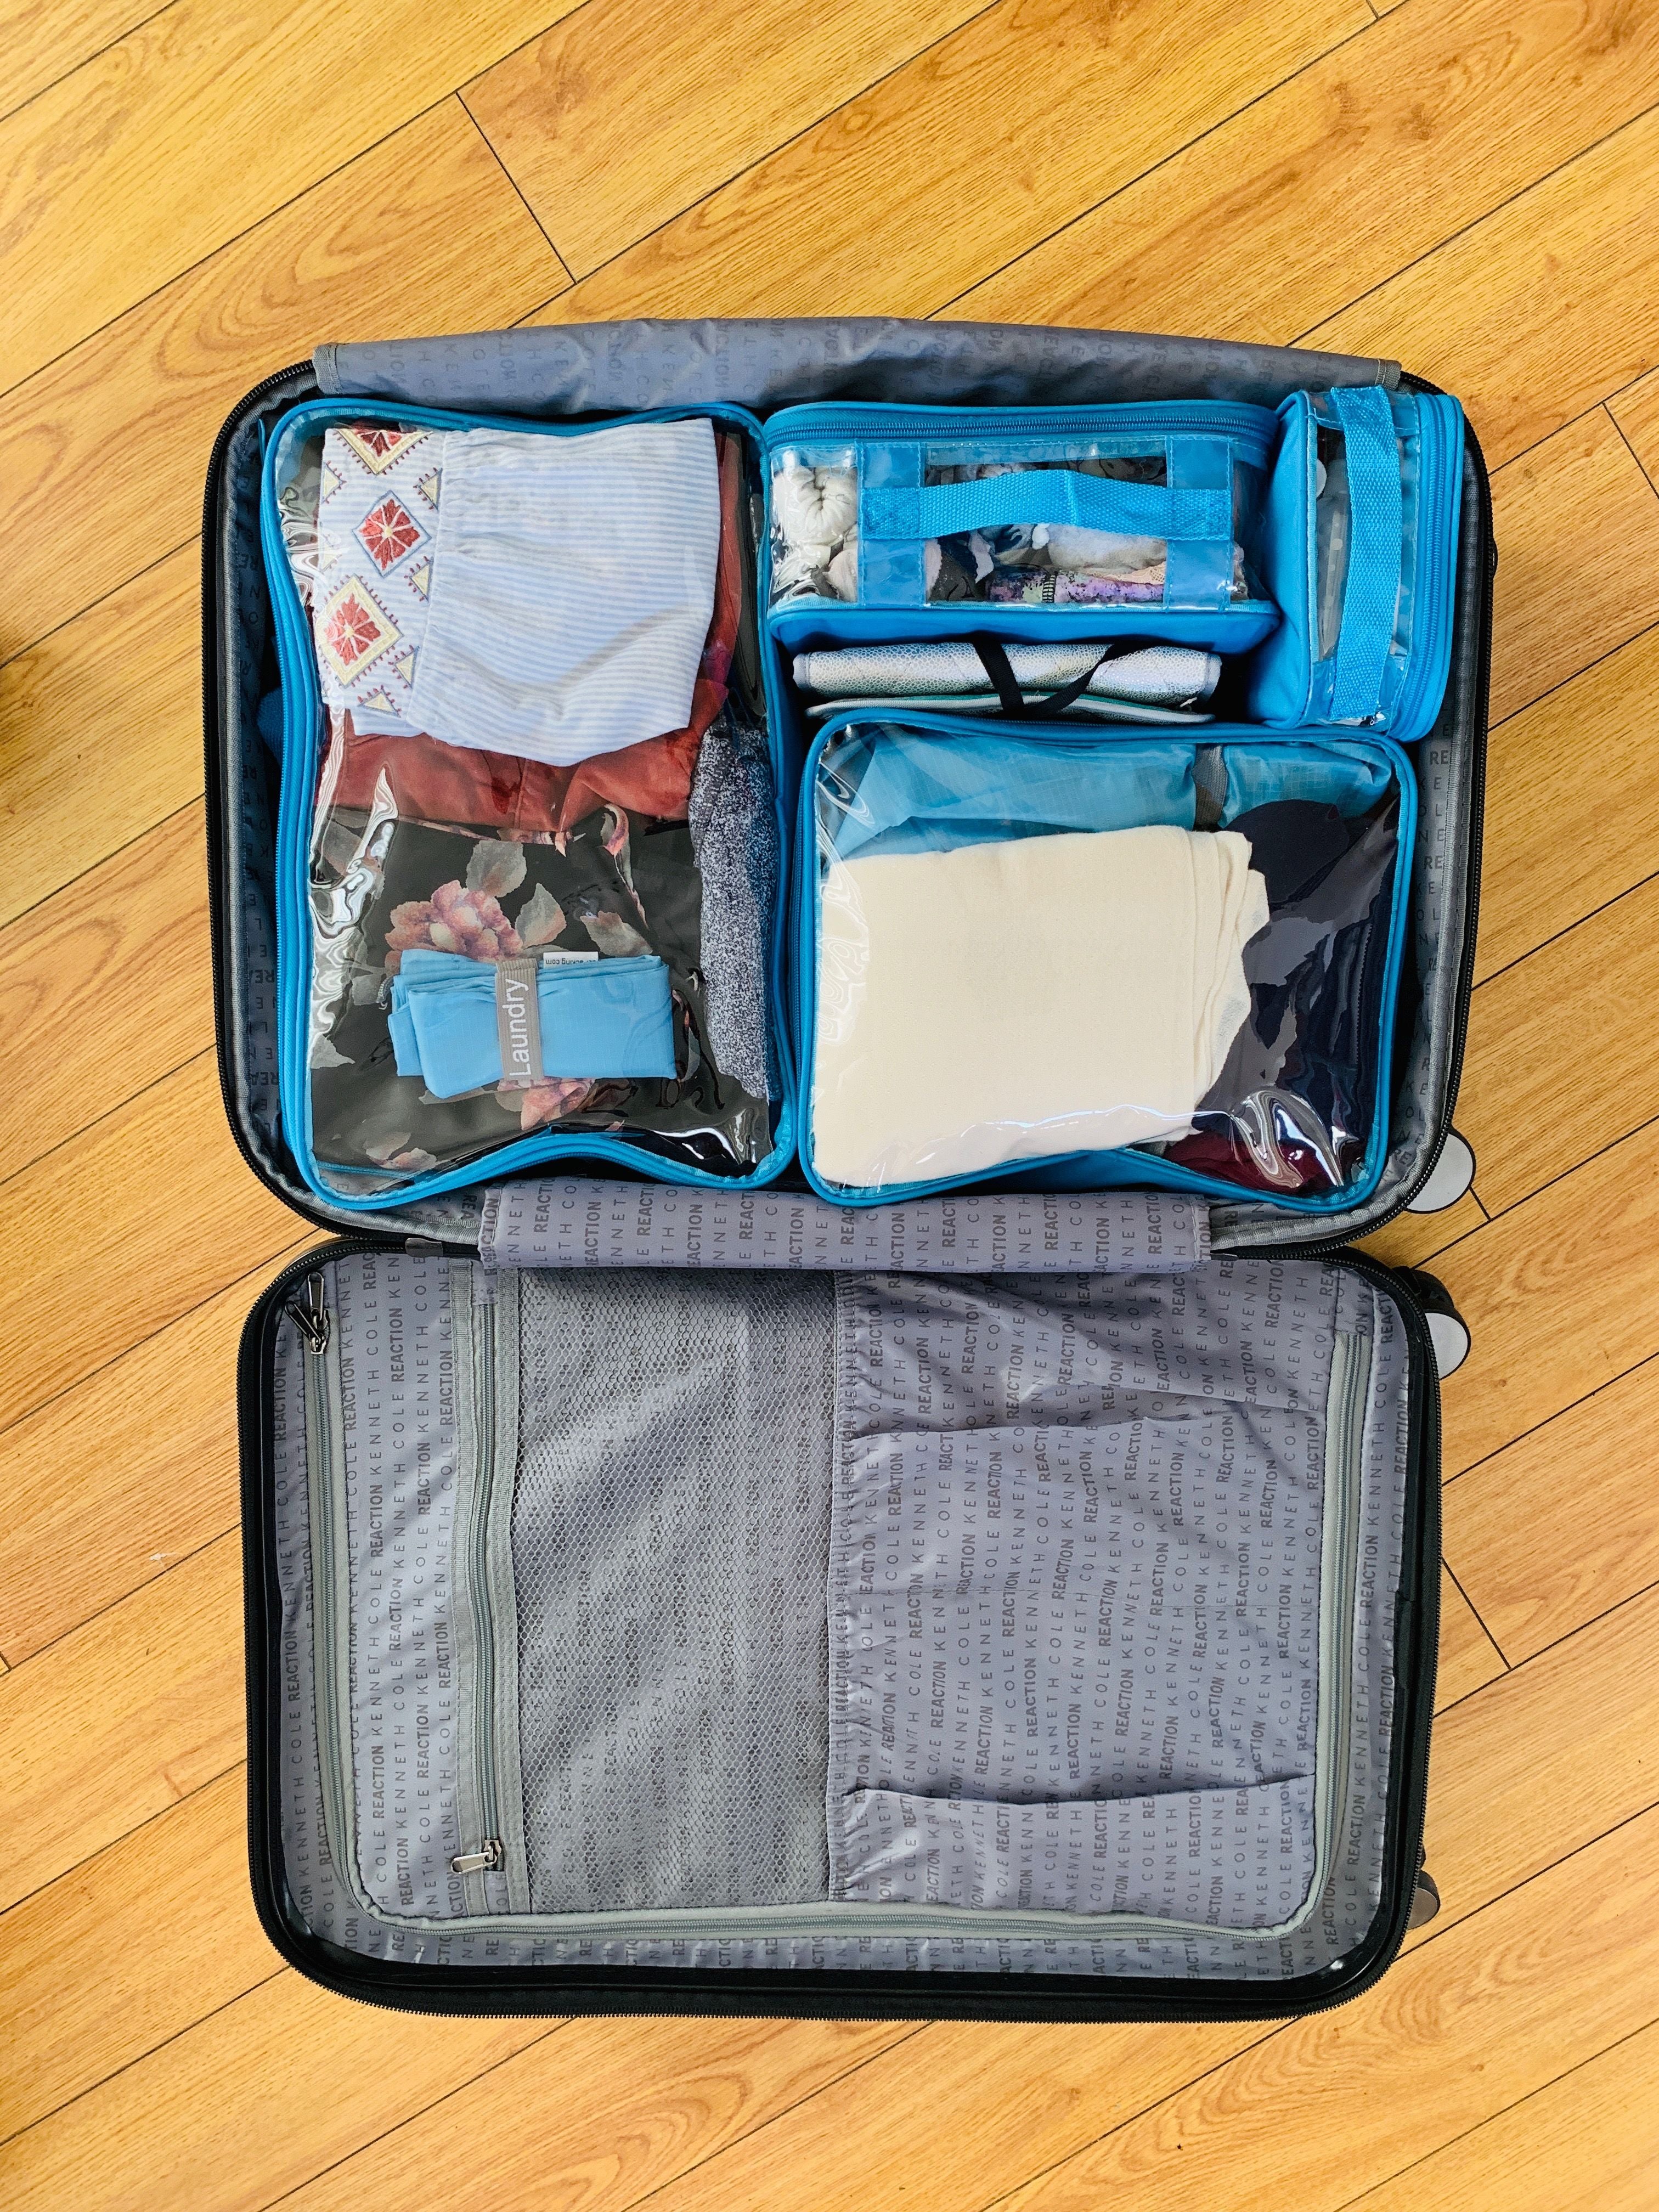 Suitcase organized with packing cubes